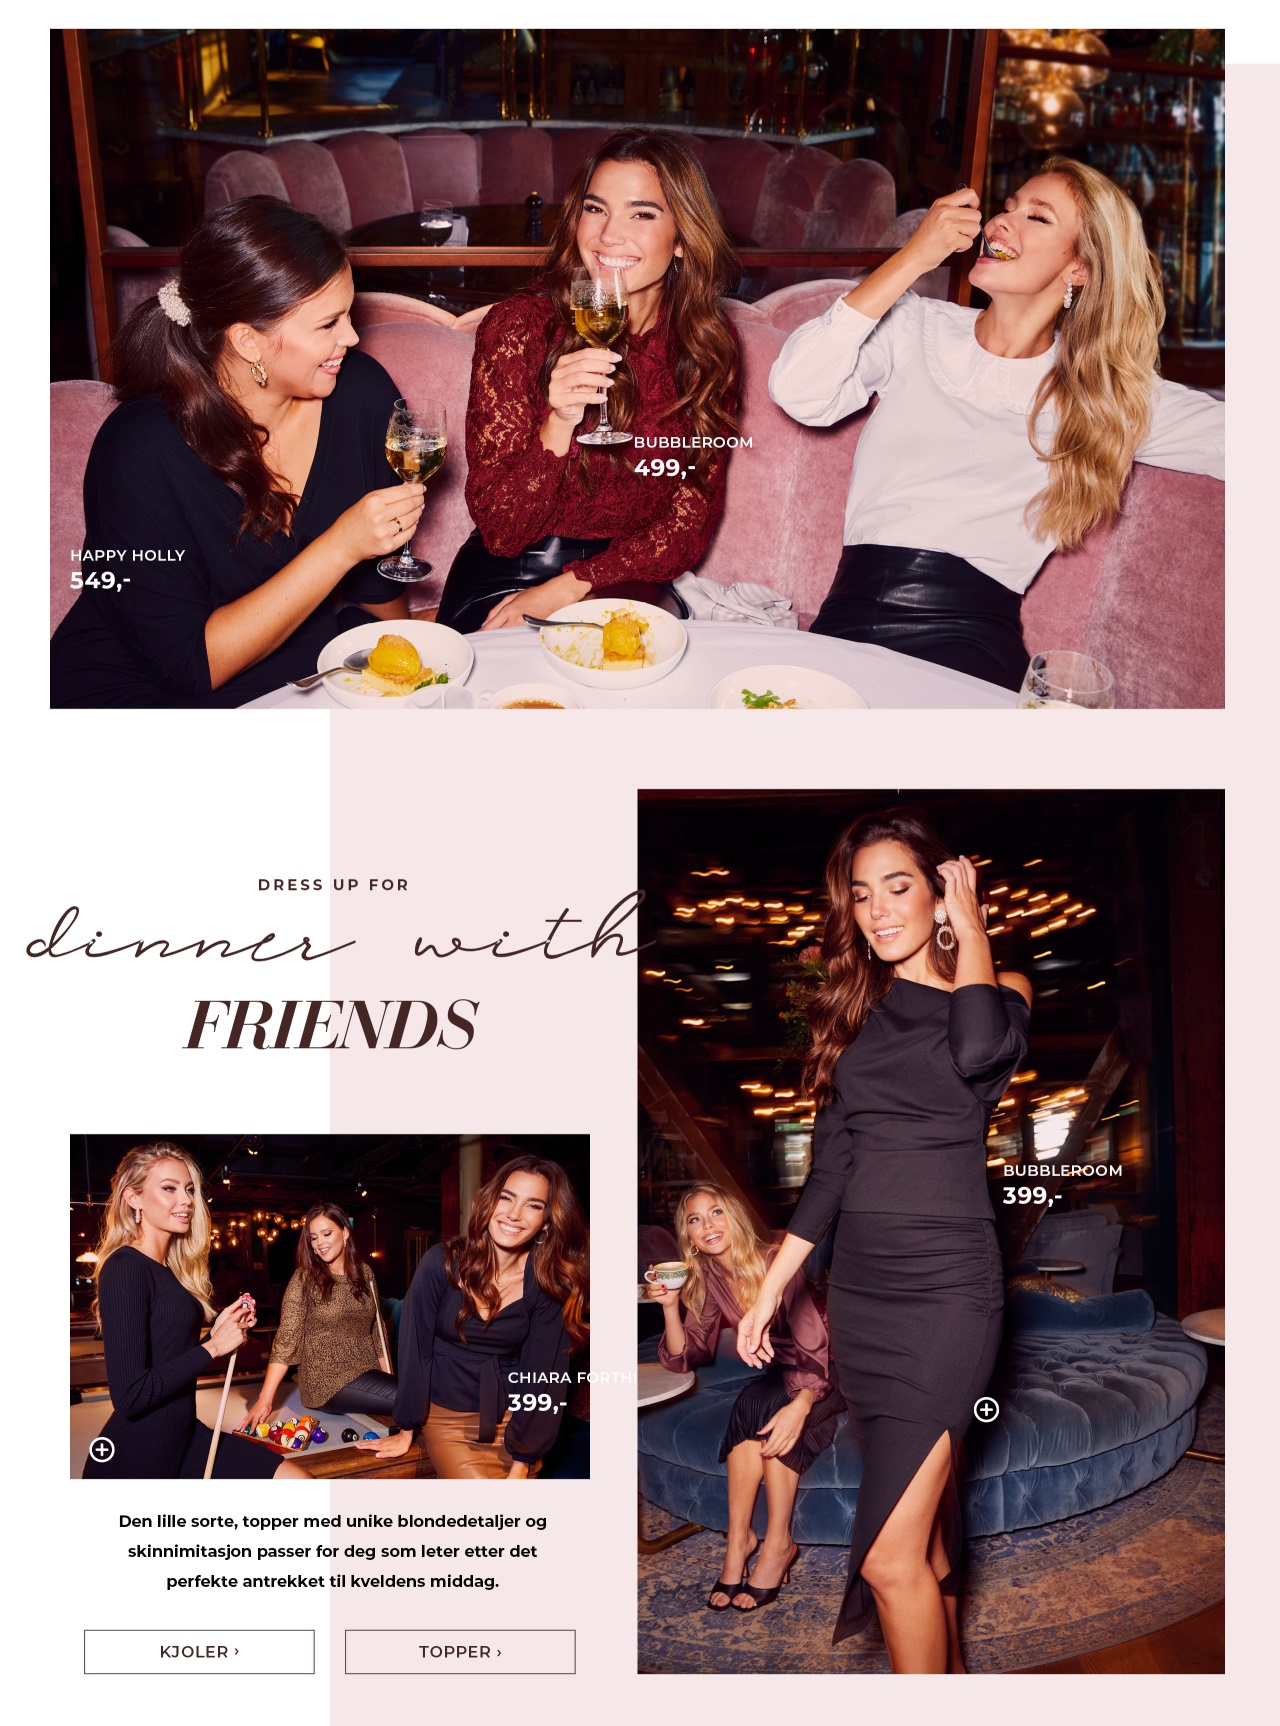 Dress up for dinner with friends - Shop her